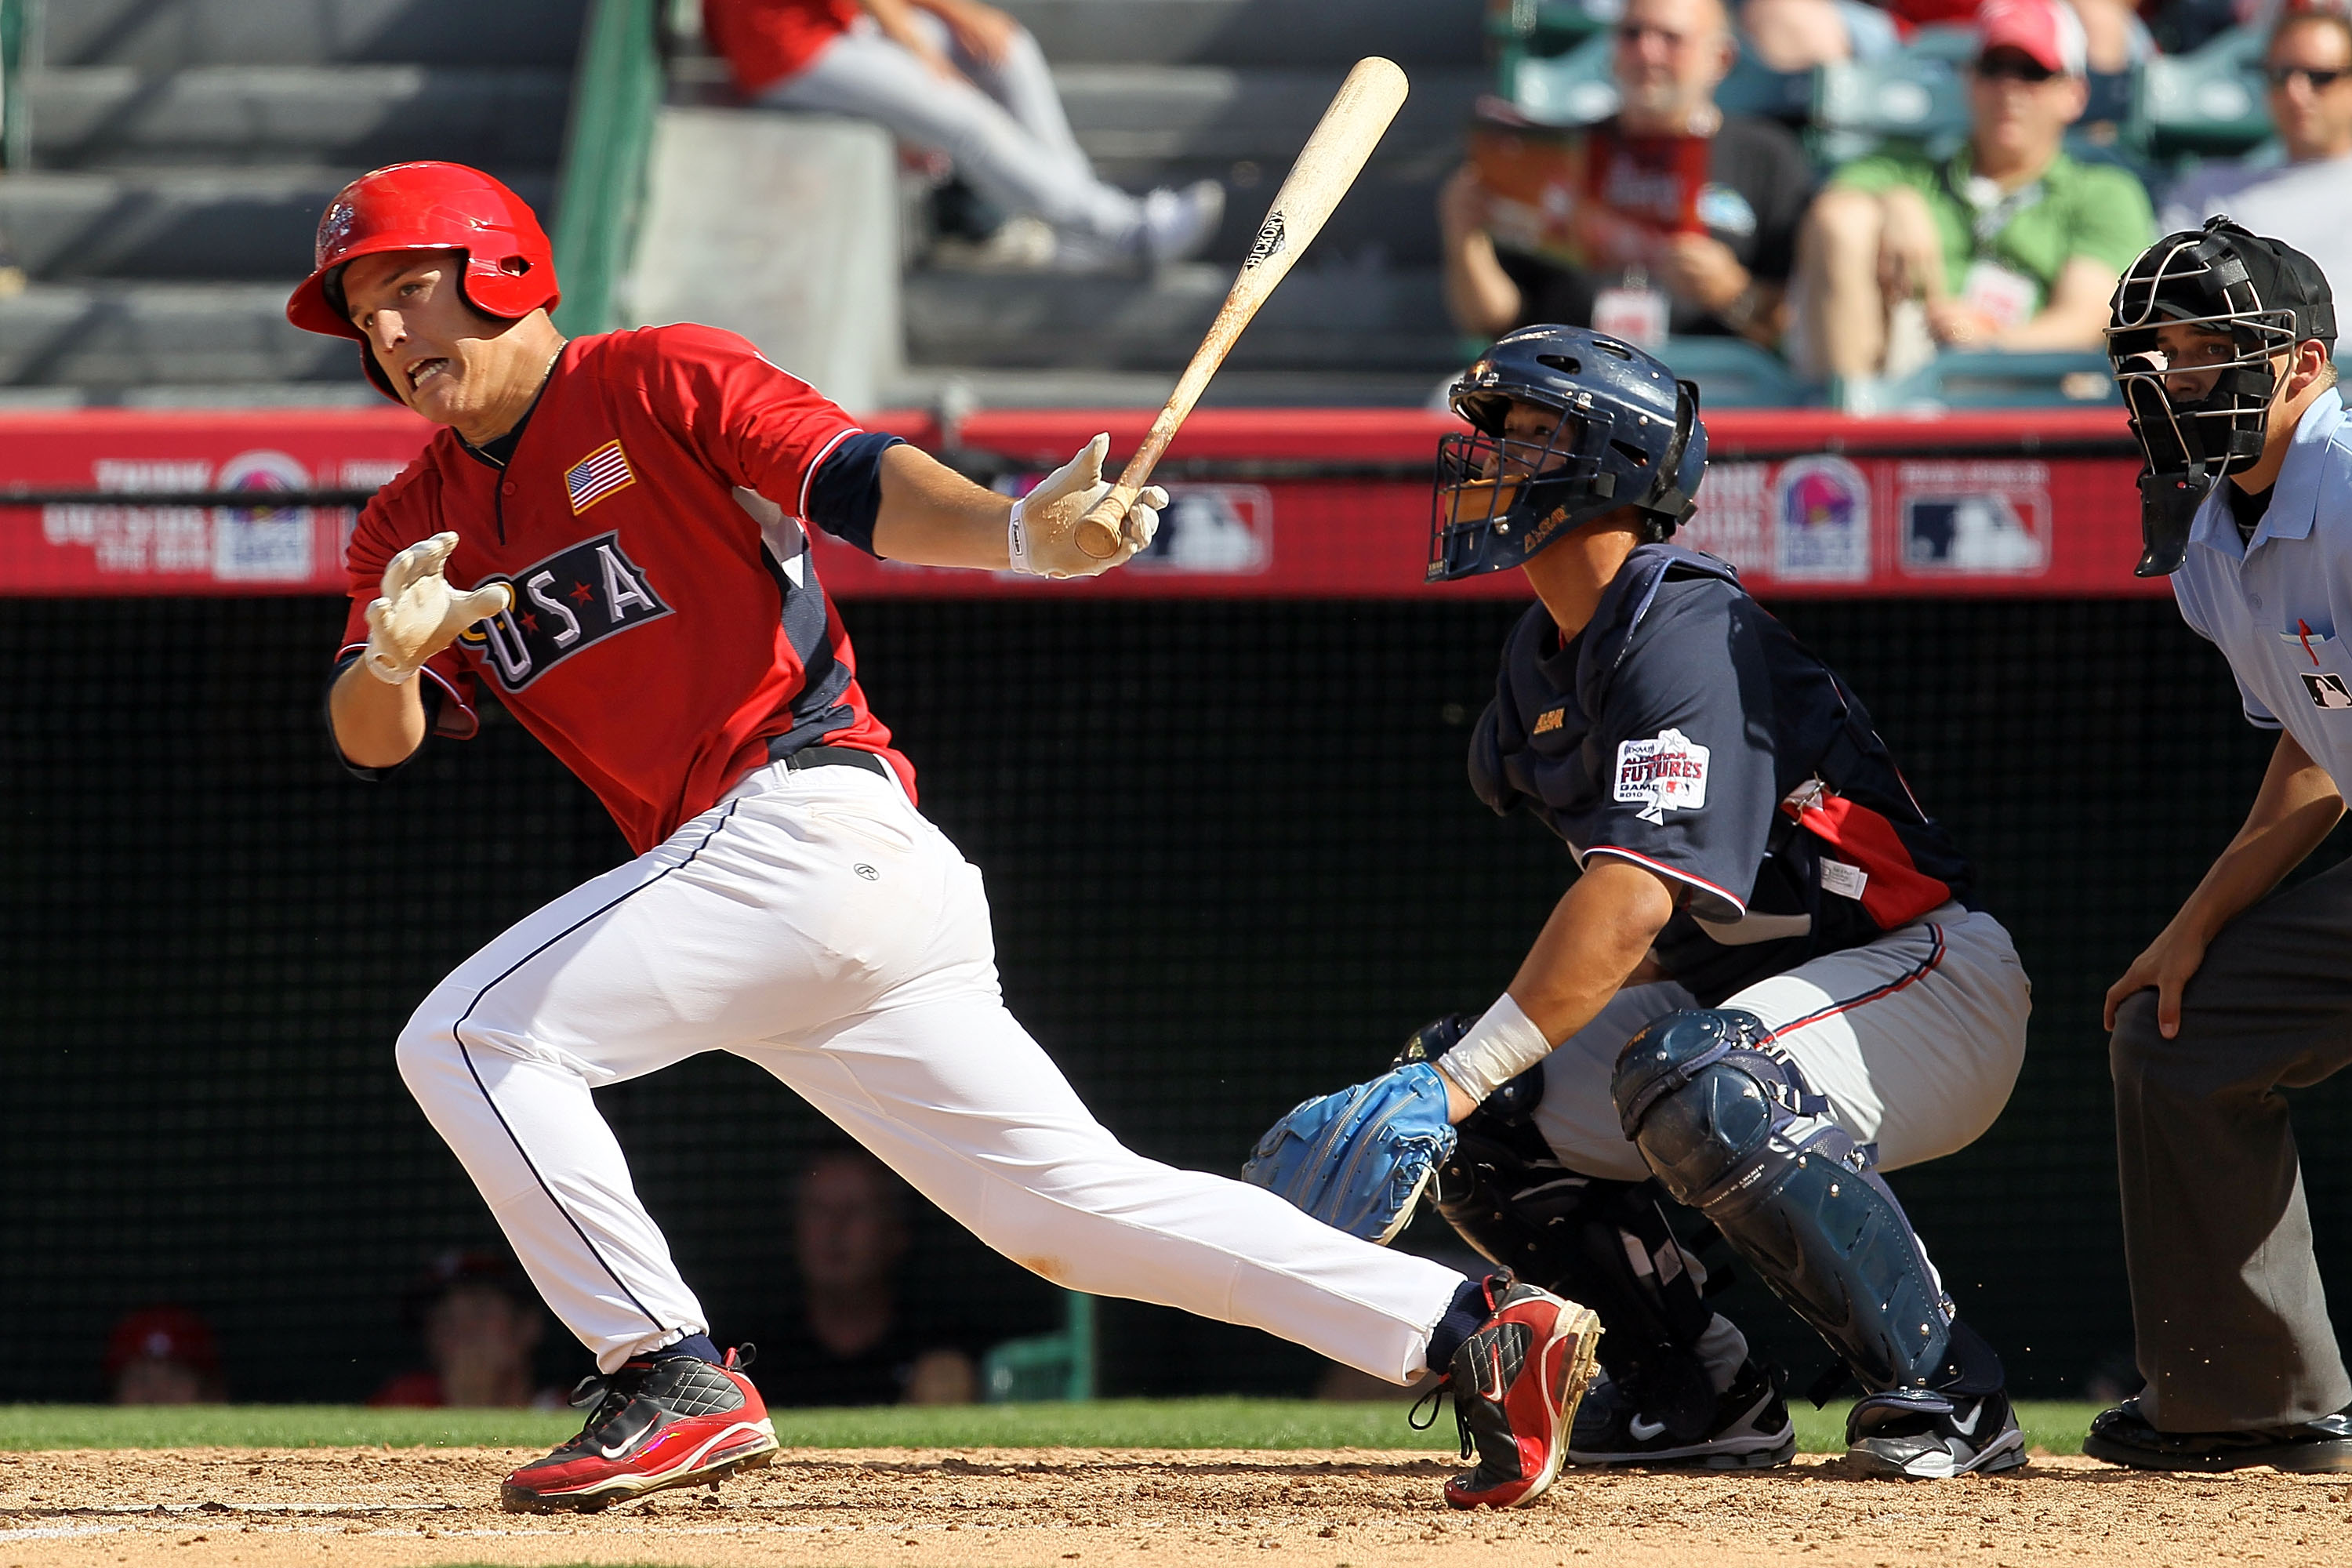 Hank Conger and Mike Trout Are Futures Game Stars - Halos Heaven